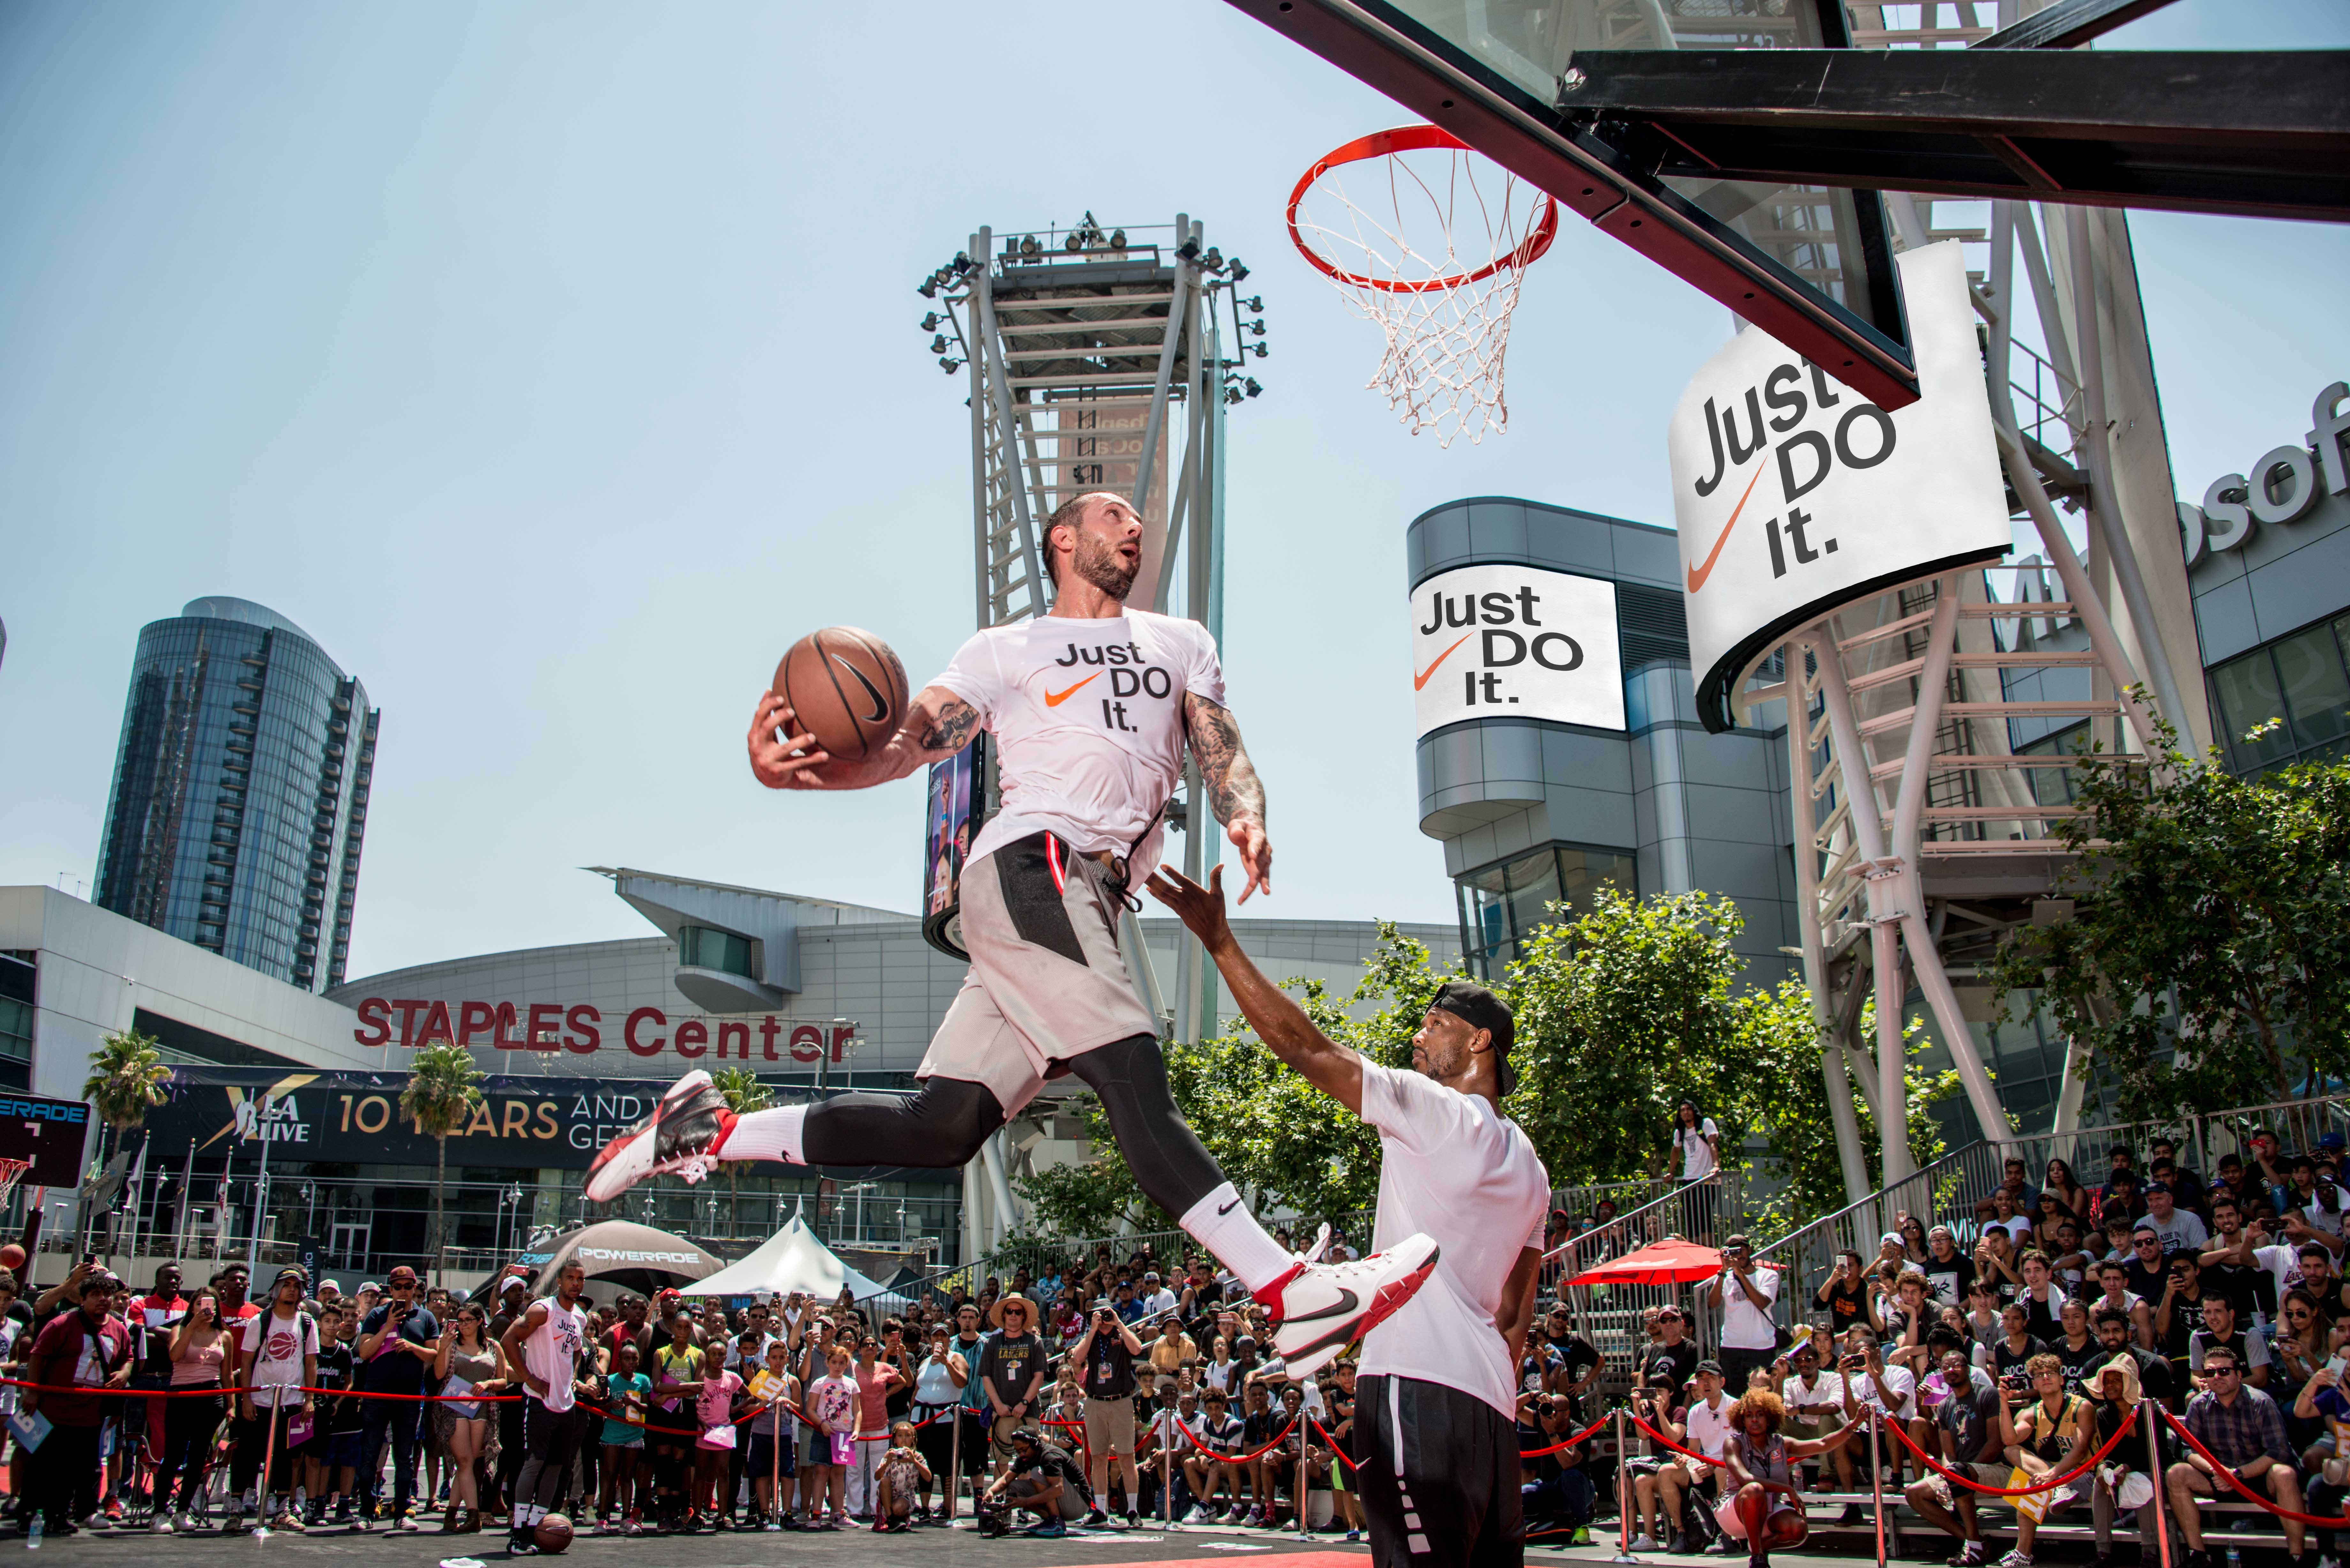 Nike Basketball 3ON3 Tournament Returns to L.A. LIVE; Serve as an Official FIBA 3x3 Satellite Tournament Business Wire